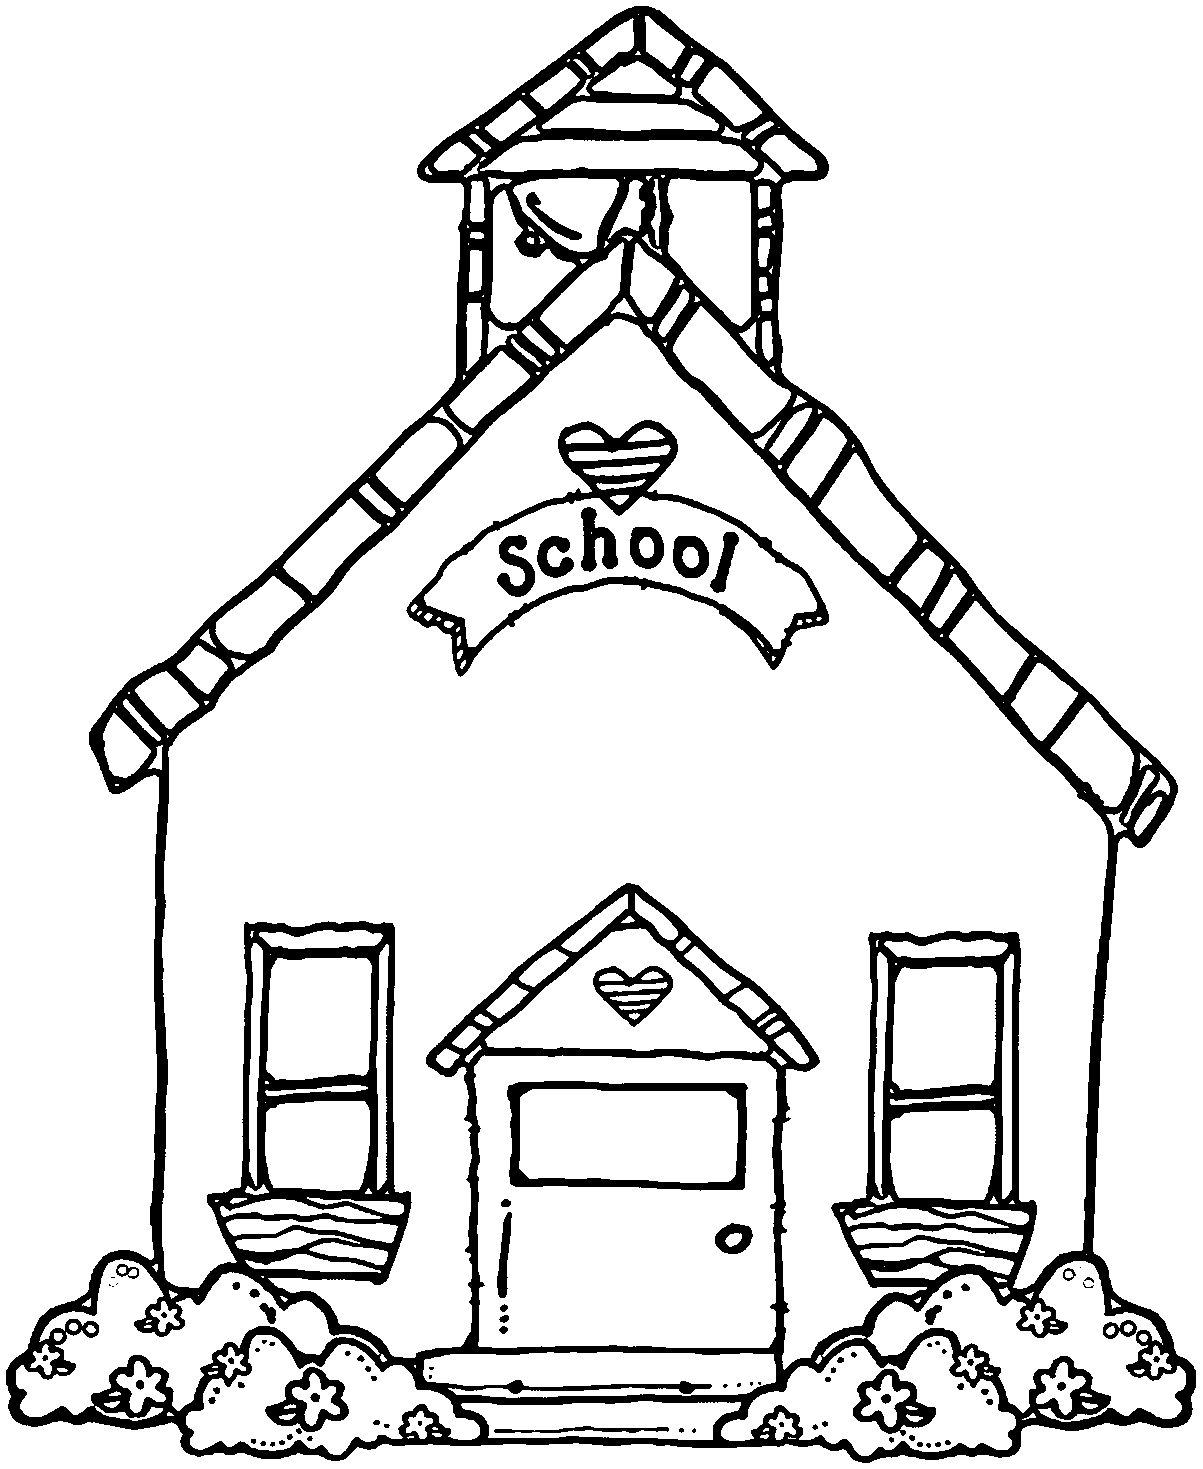 Schoolhouse school house black and white clipart clipartfest